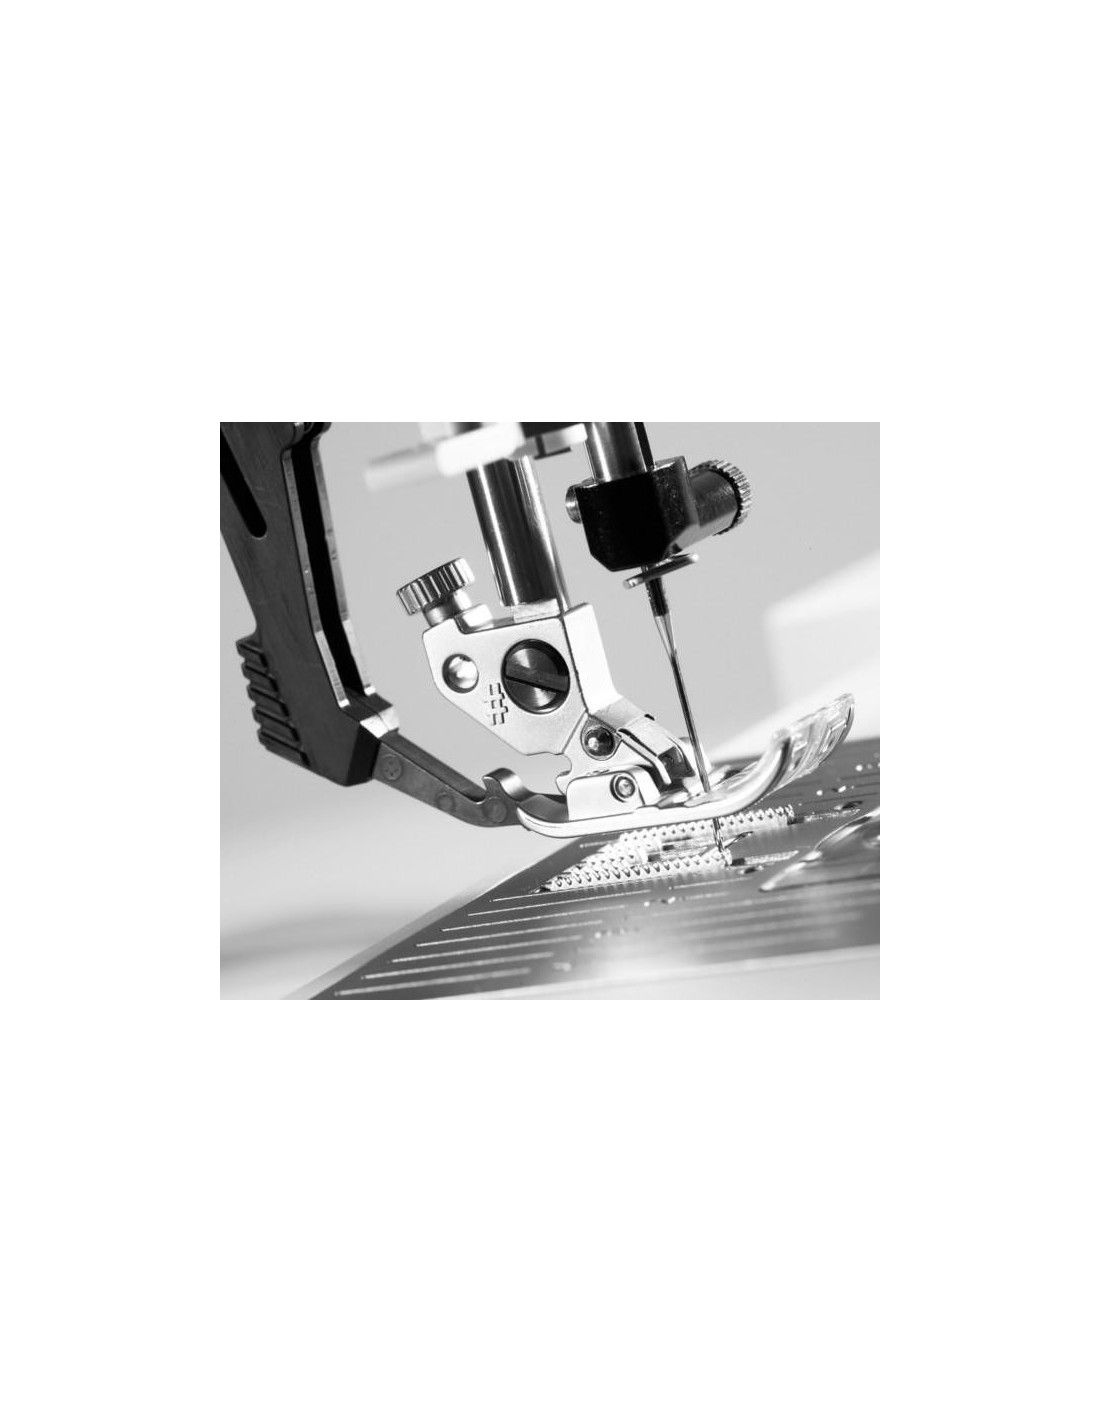 PFAFF creative 4.5 Sewing and Embroidery Machine for impact